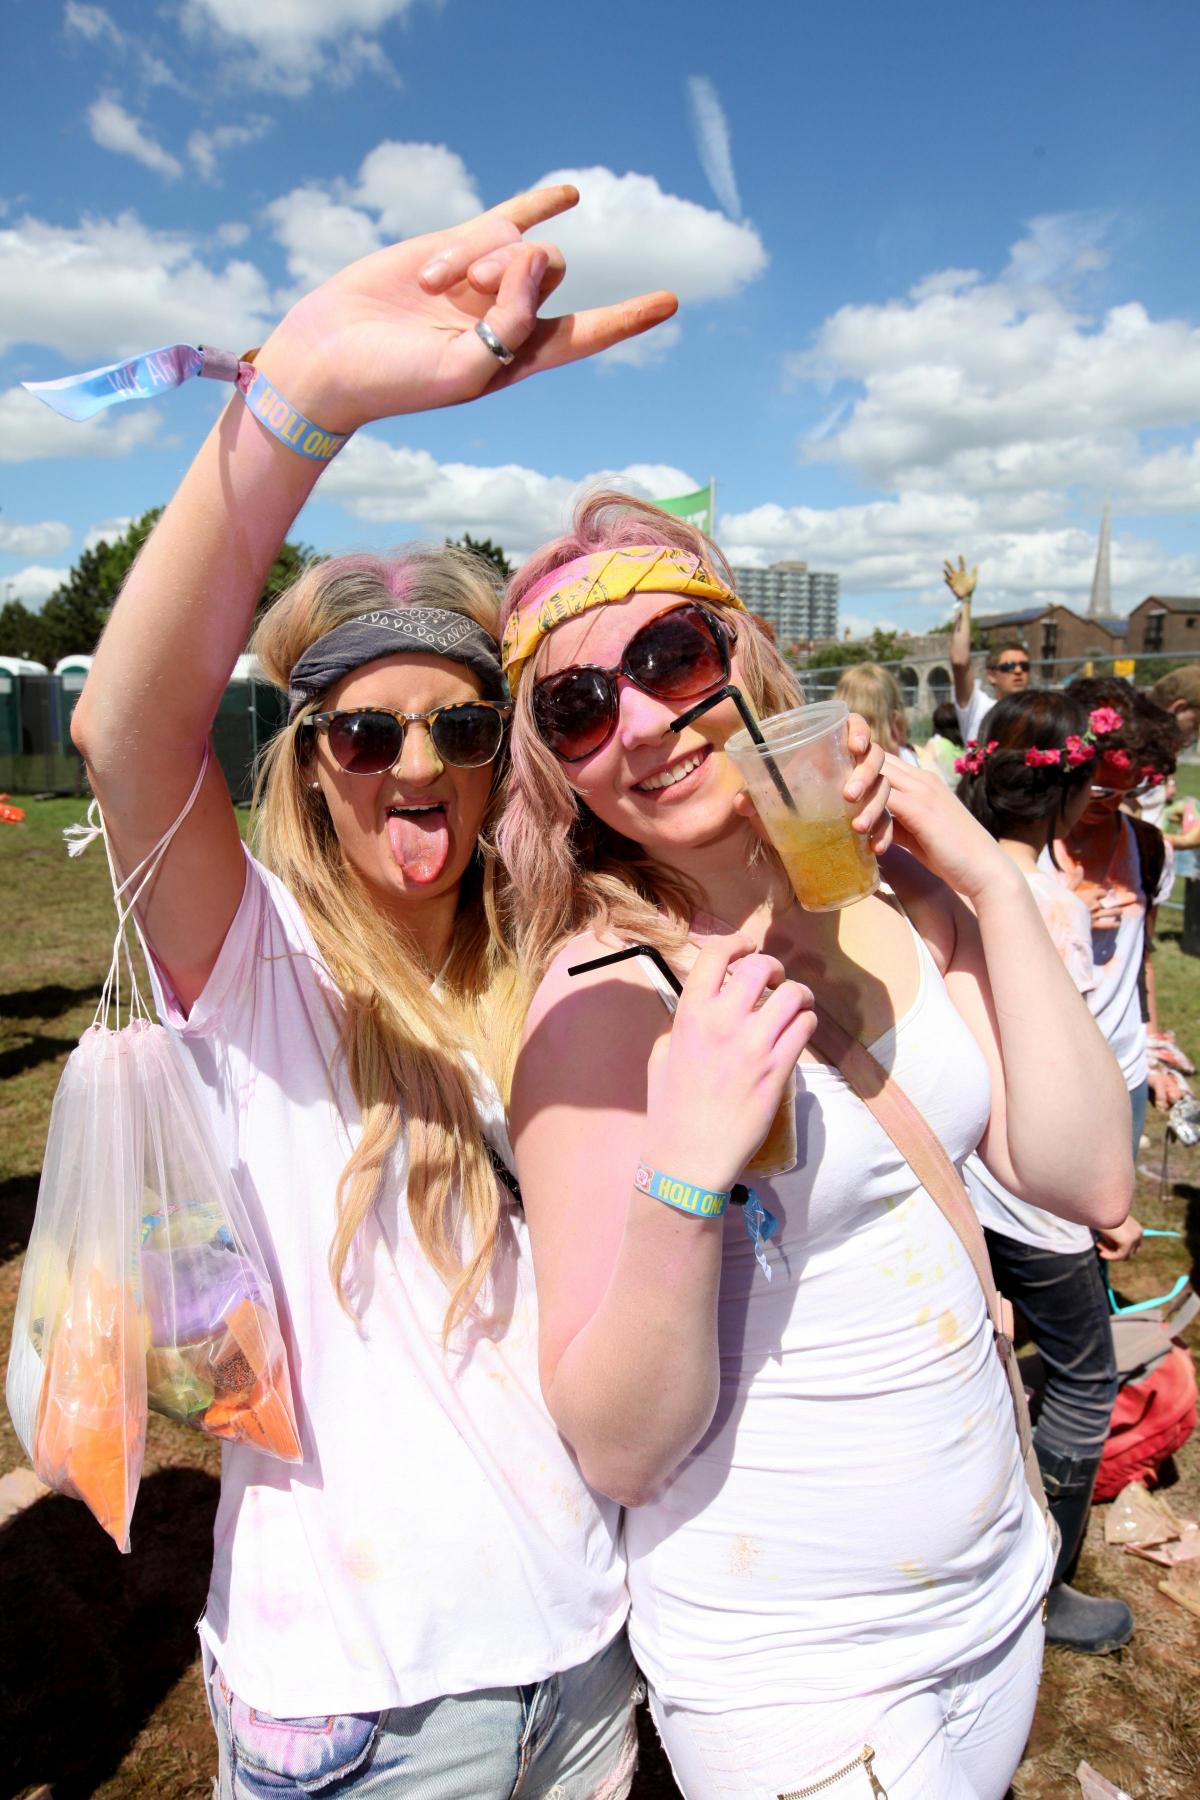 Picture from the Holi One Music Festival 2014.